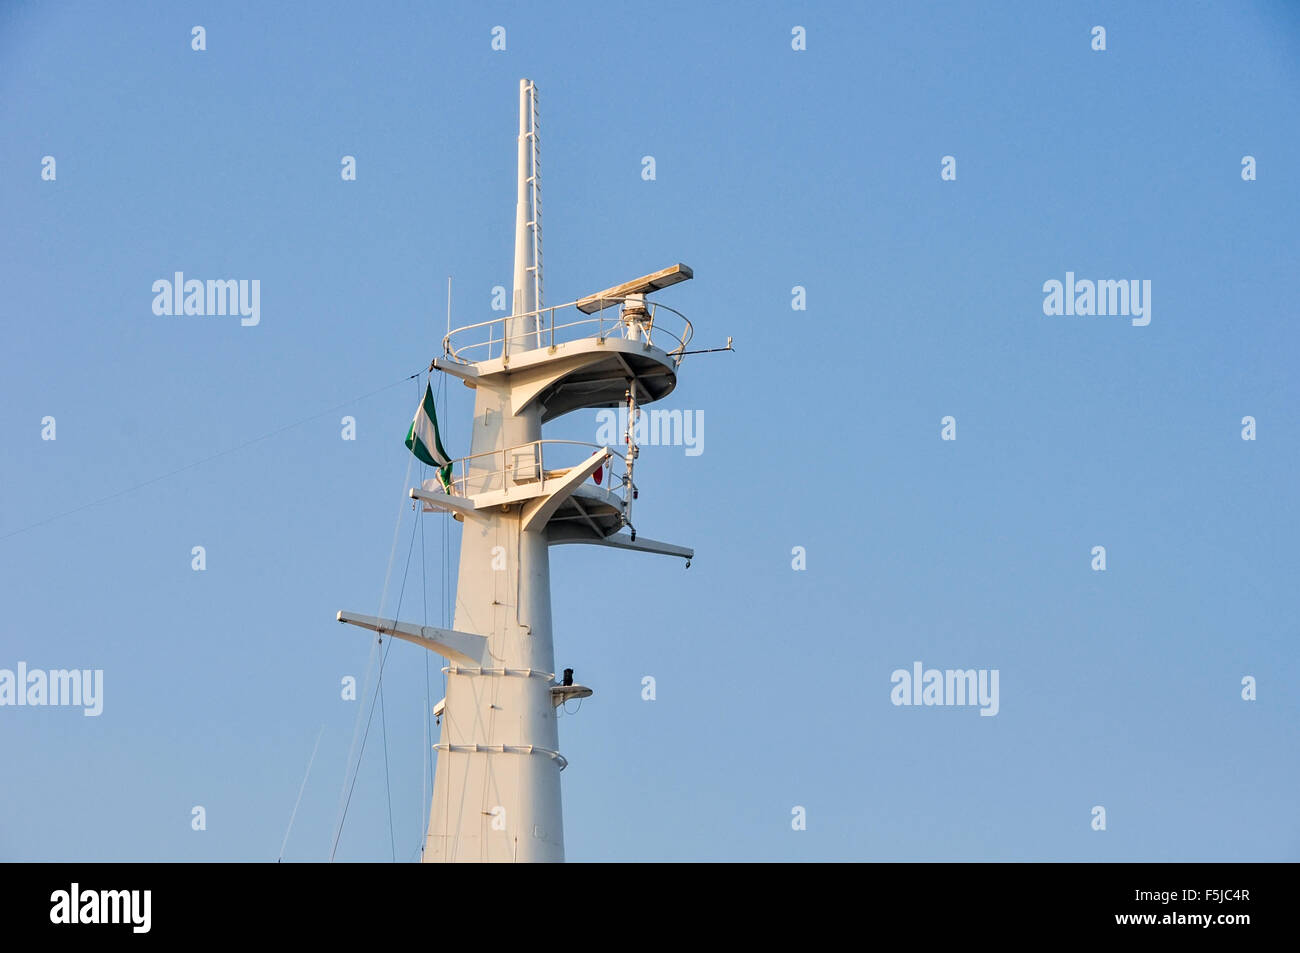 Mast with navigation, communication and safety equipment on ship Stock Photo